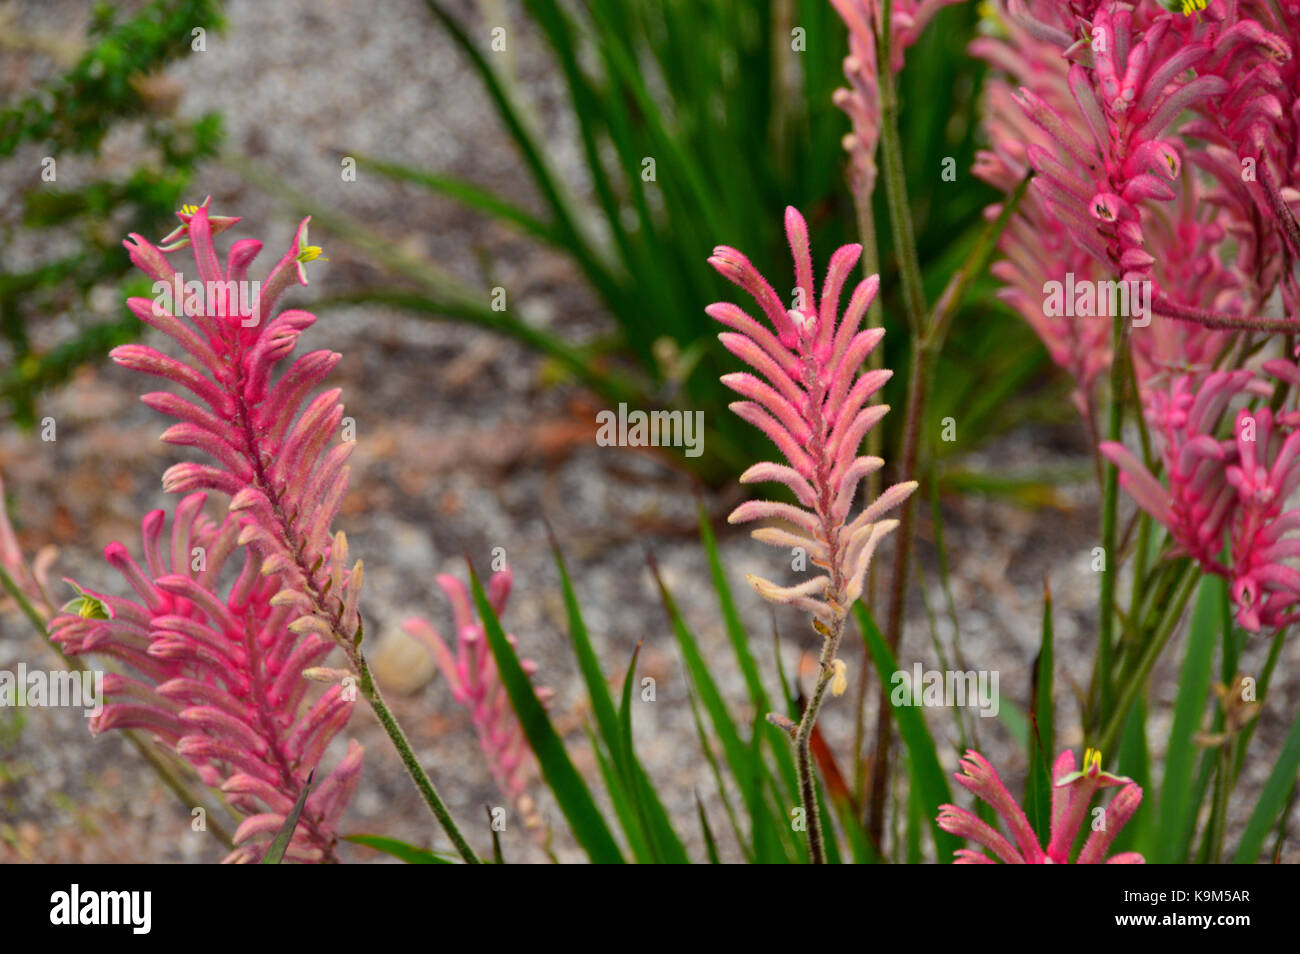 The Pink Kangaroo Paw Flowers (Anigozanthos Rufus) 'Bush Pearl' from Australia grown at the Eden Project, Cornwall, England, UK. Stock Photo